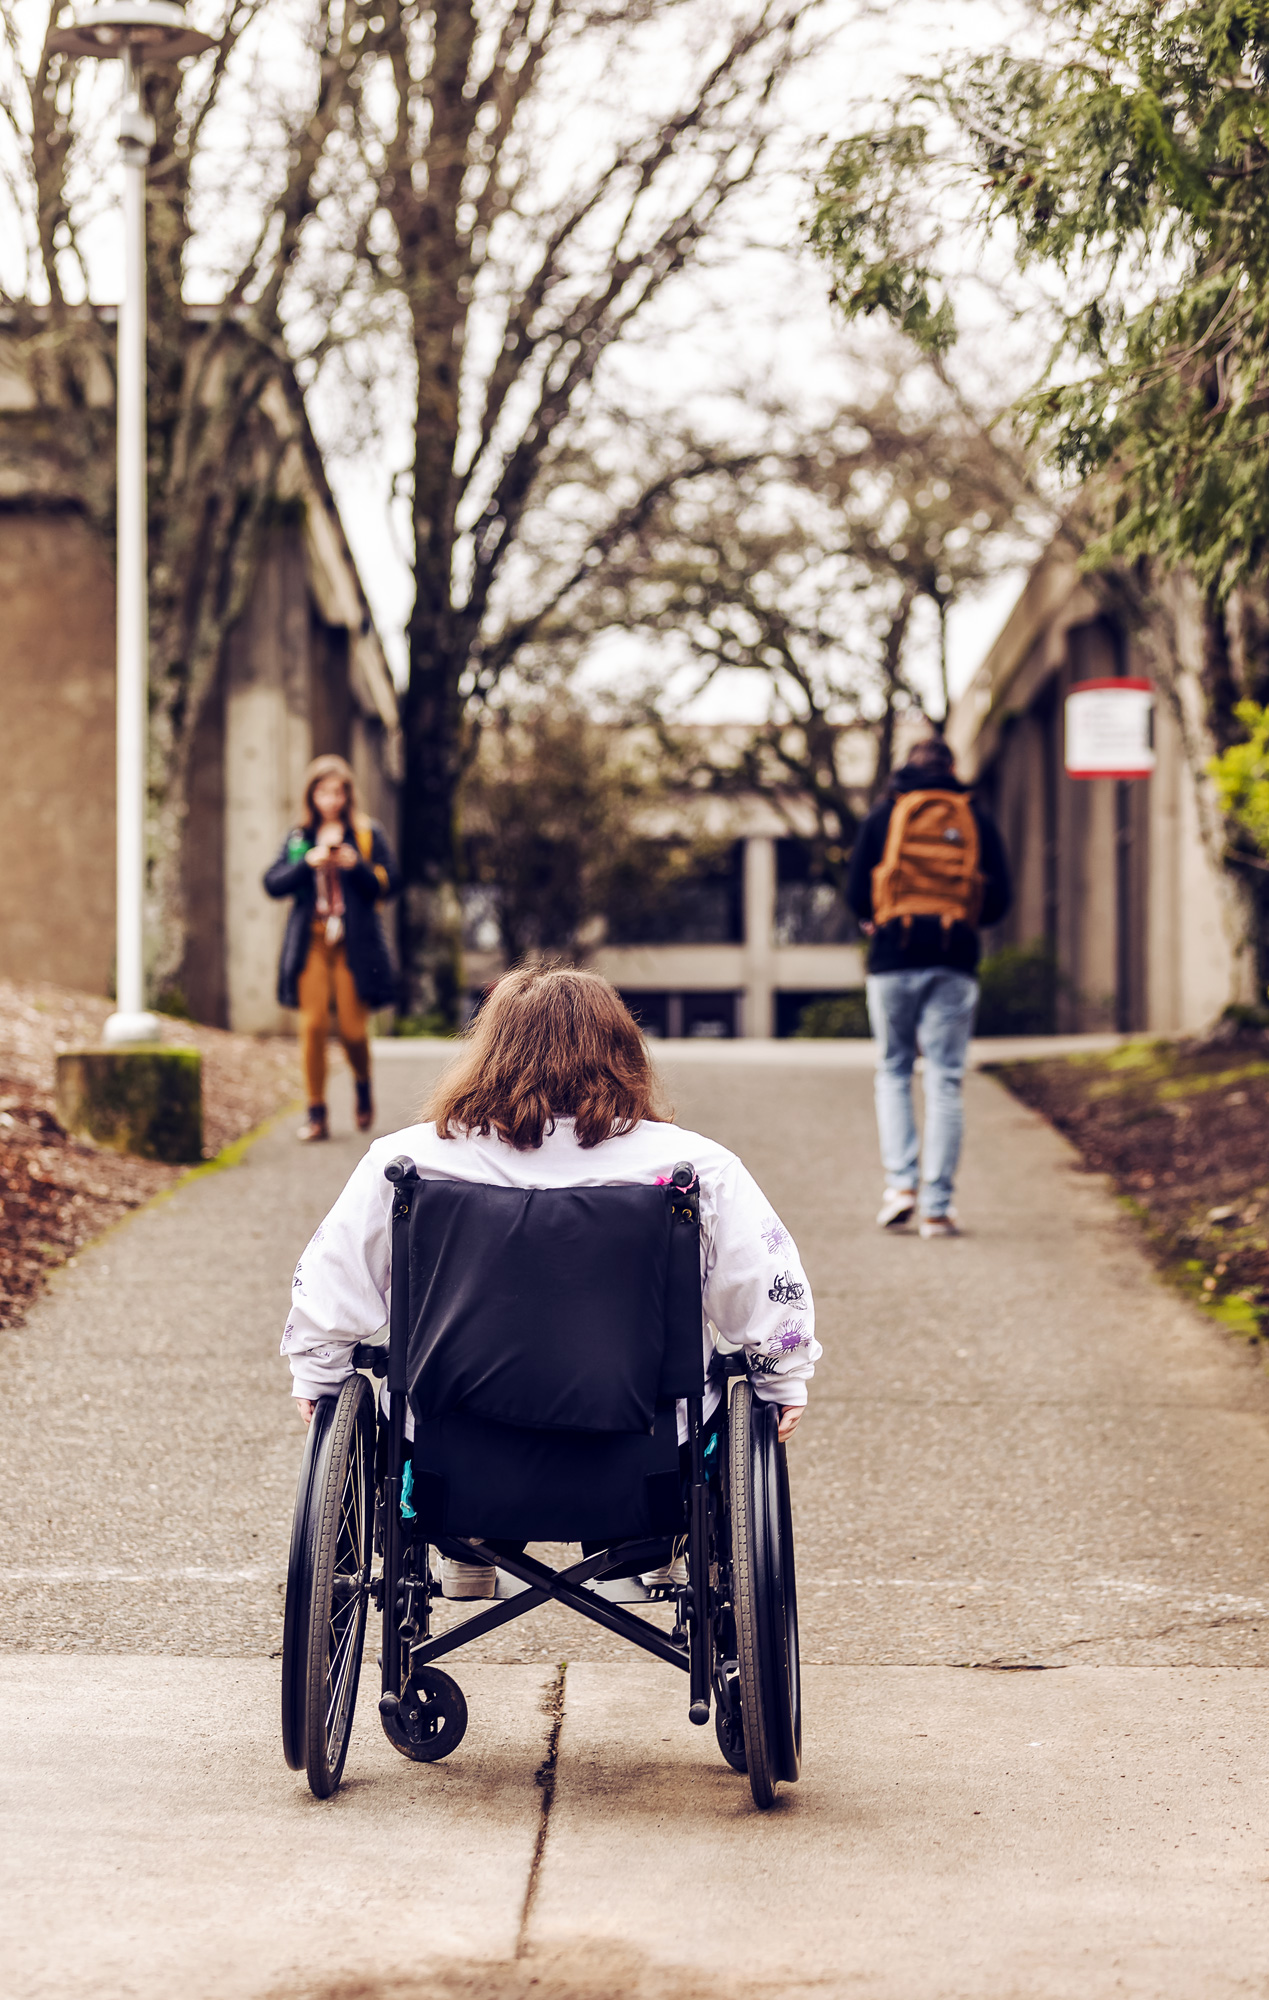 Photo capturing someone in a wheelchair looking up a steep hill to show accessibility issues on the campus.